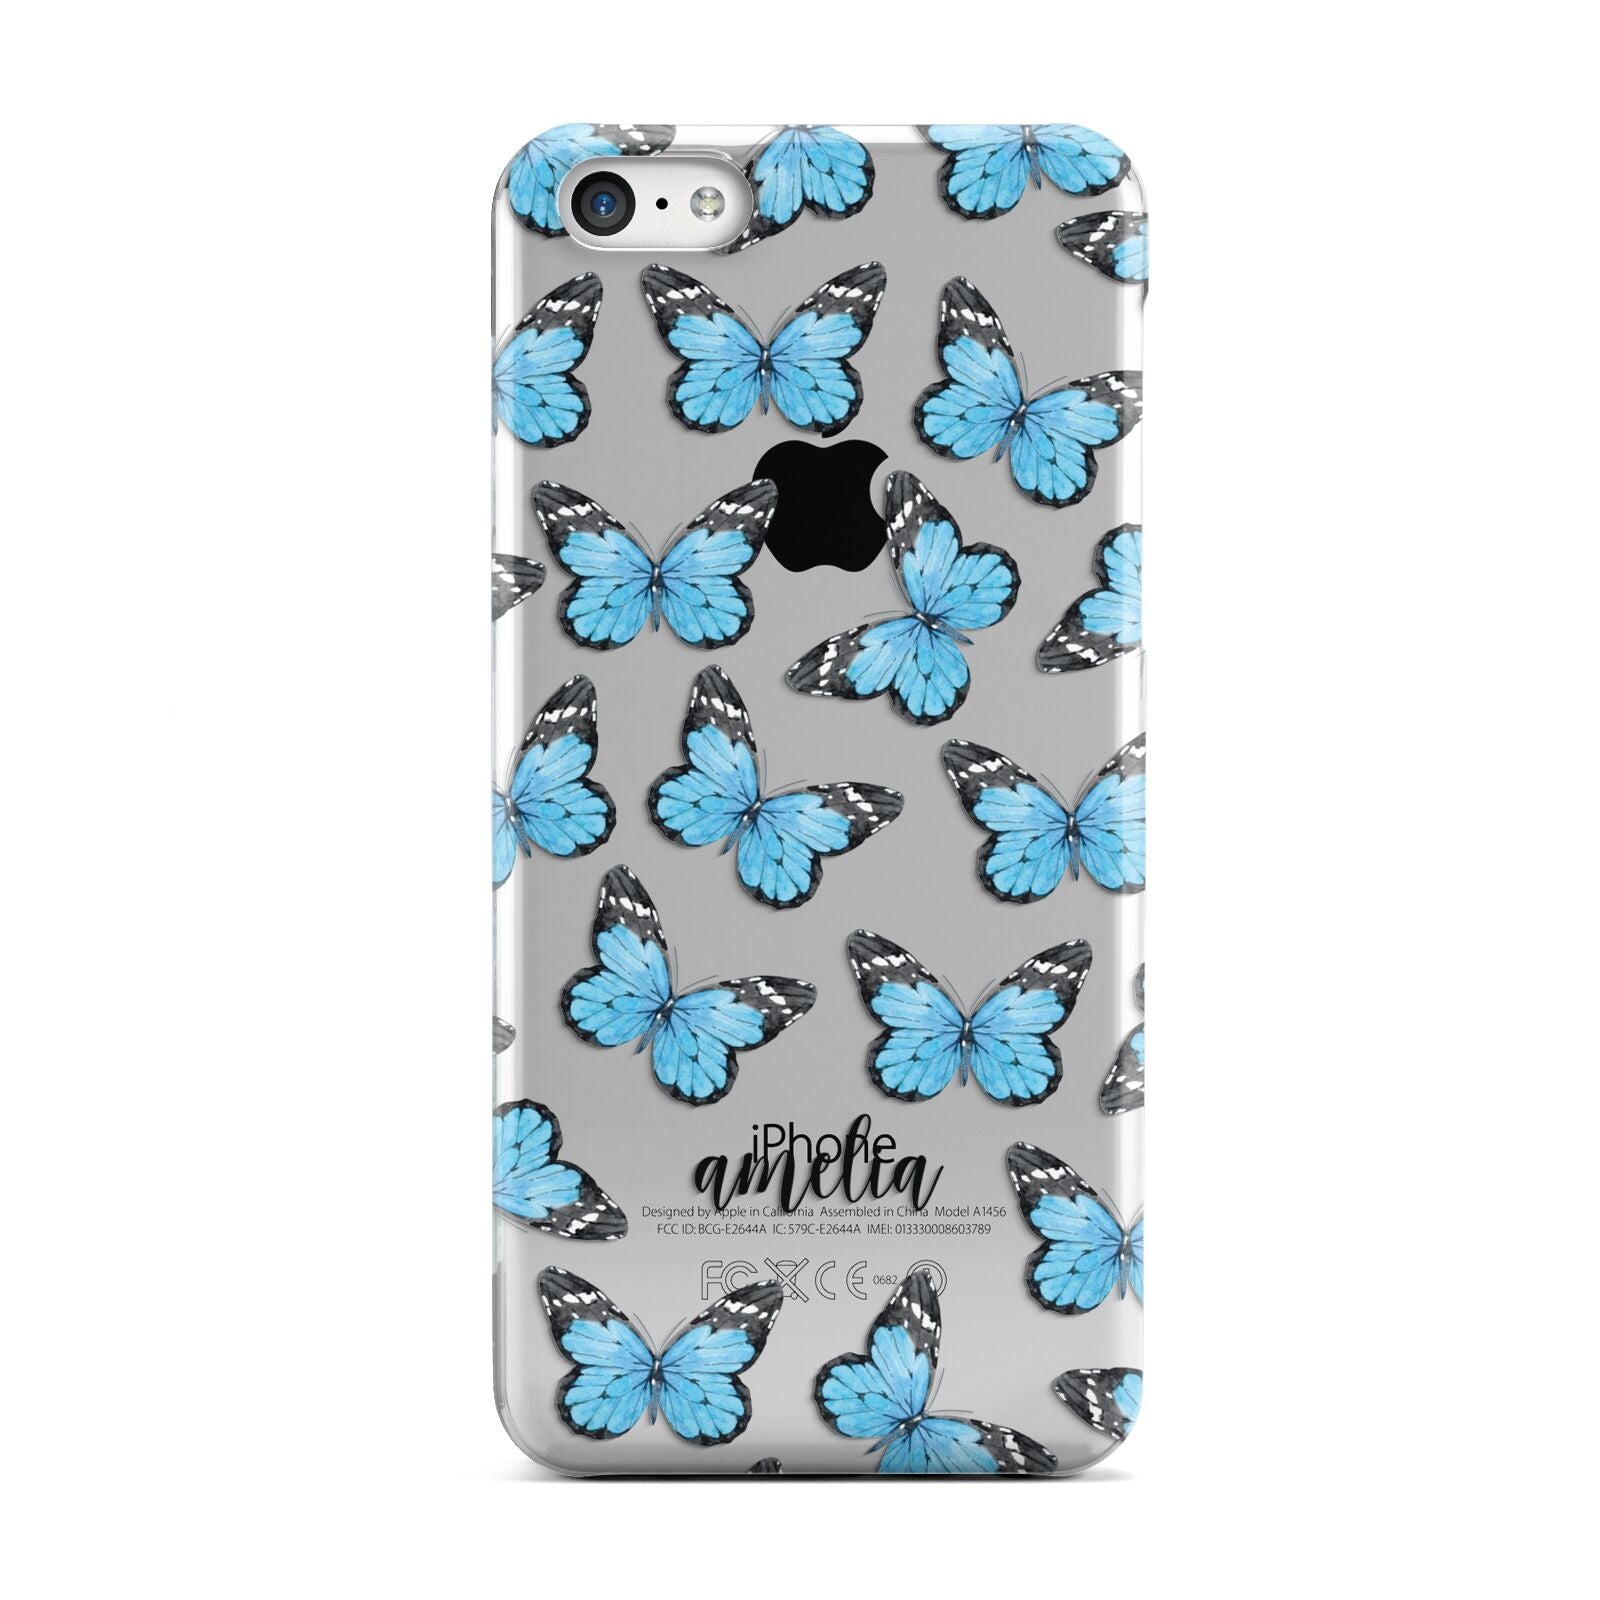 Blue Butterflies with Name Apple iPhone 5c Case